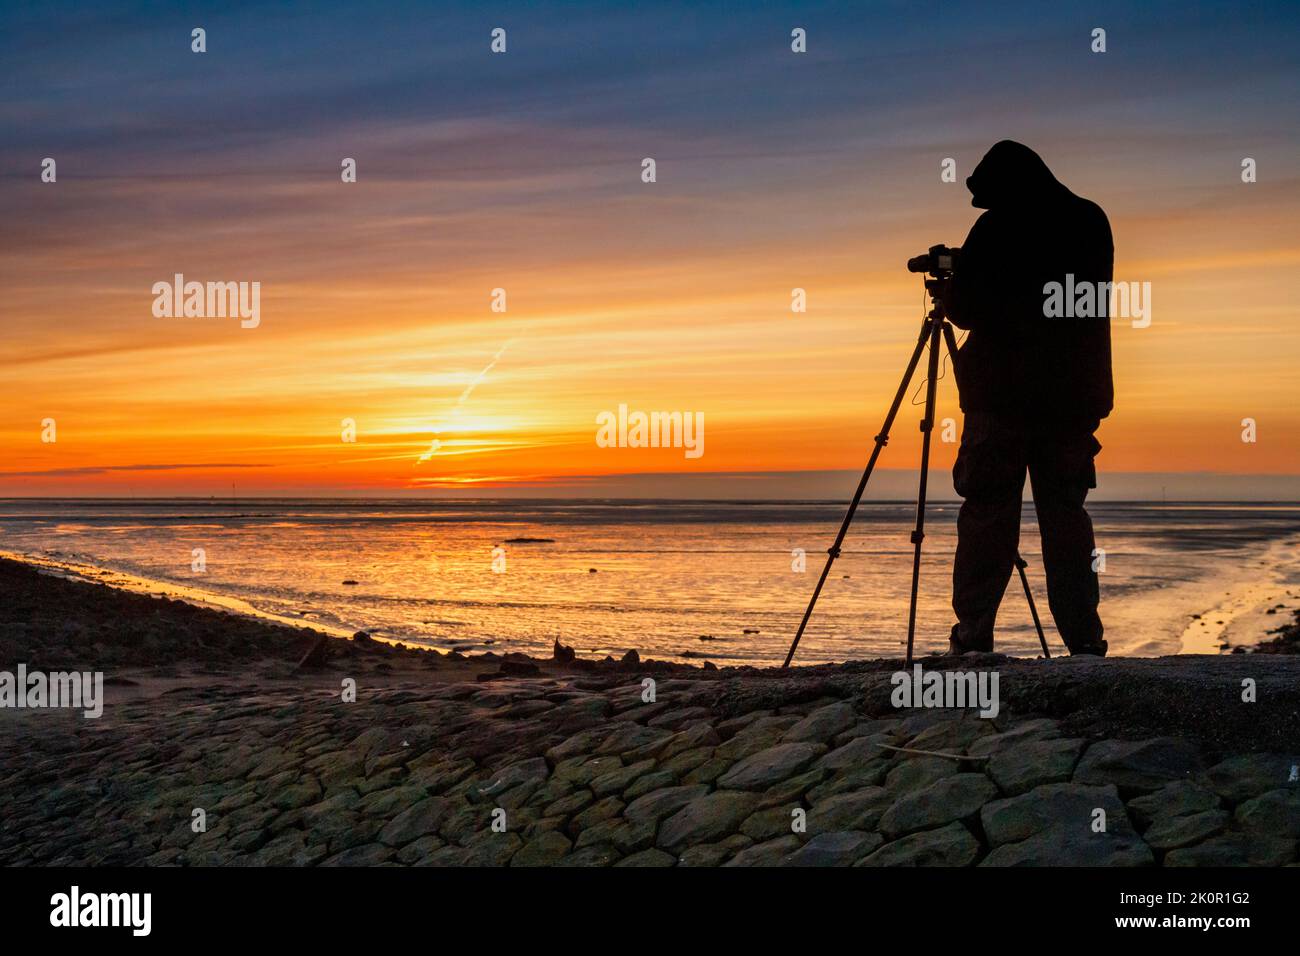 Tourist with camera during sunset on Trischedamm, North Sea at low tide Stock Photo